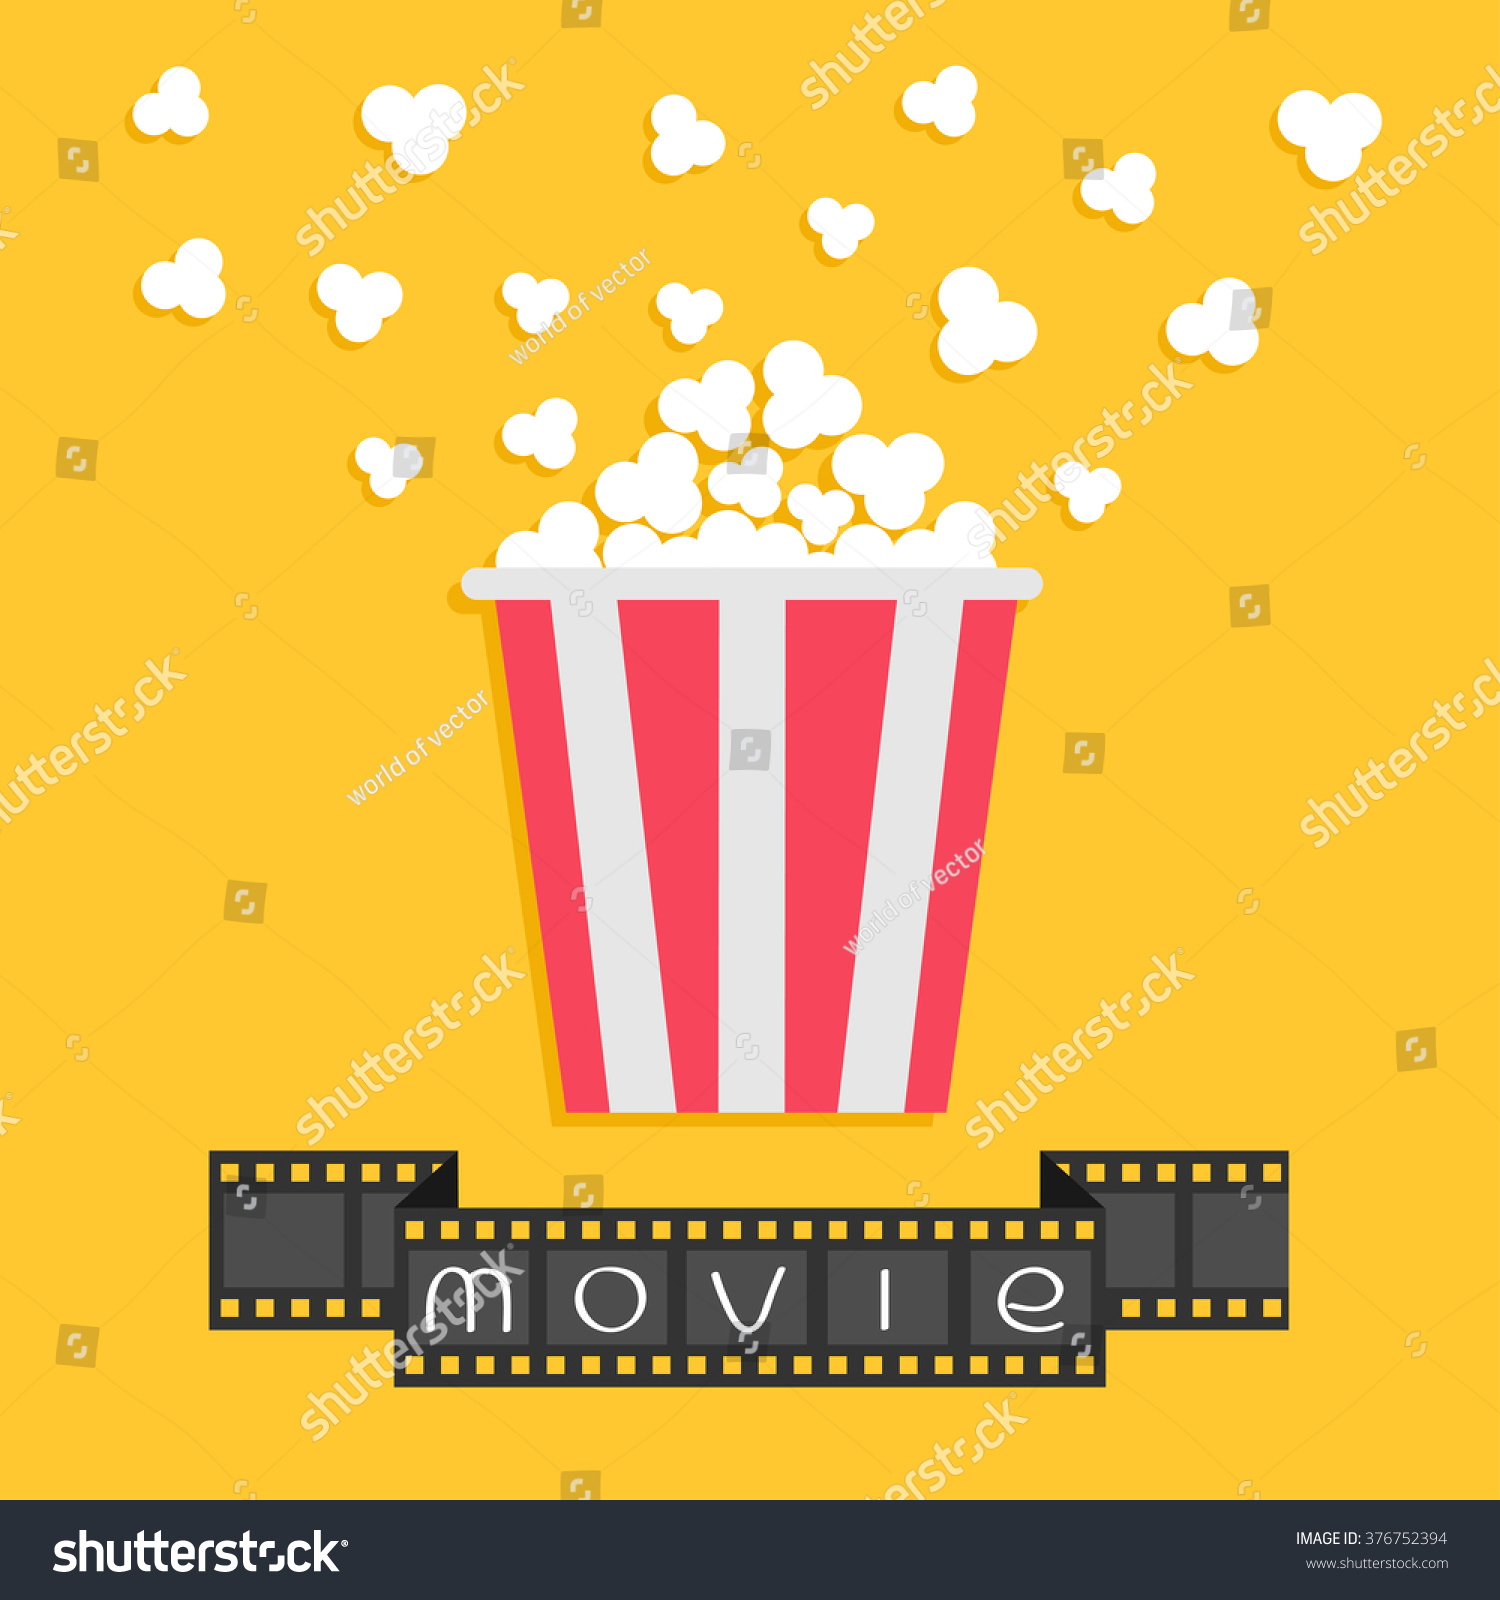 Download Popcorn Film Strip Ribbon Red Yellow Stock Image Download Now PSD Mockup Templates